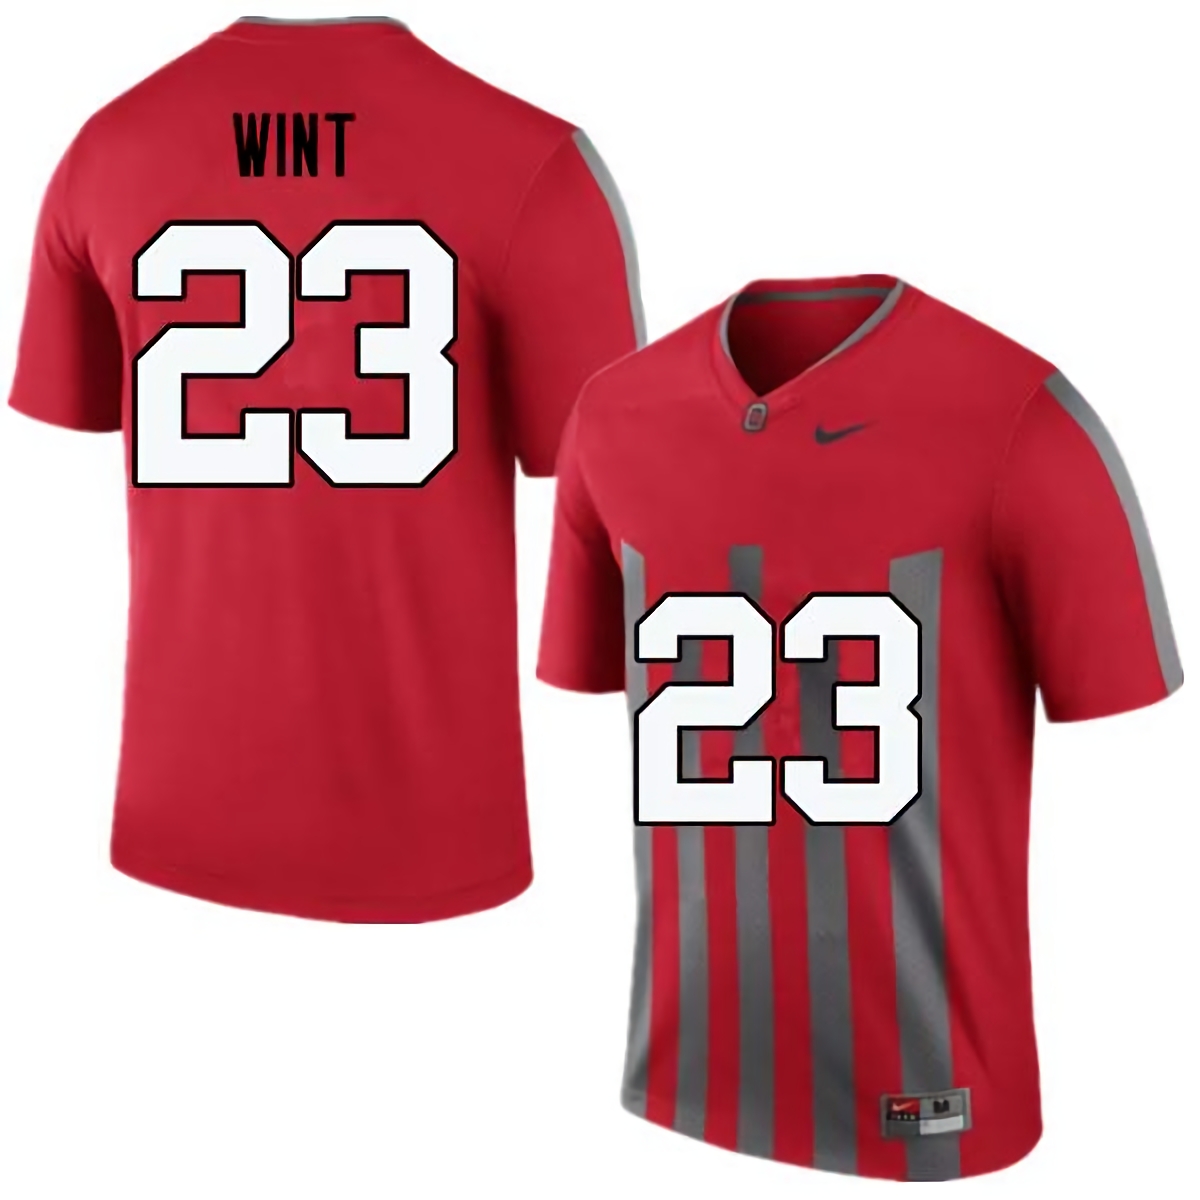 Jahsen Wint Ohio State Buckeyes Men's NCAA #23 Nike Throwback Red College Stitched Football Jersey GIJ7856VI